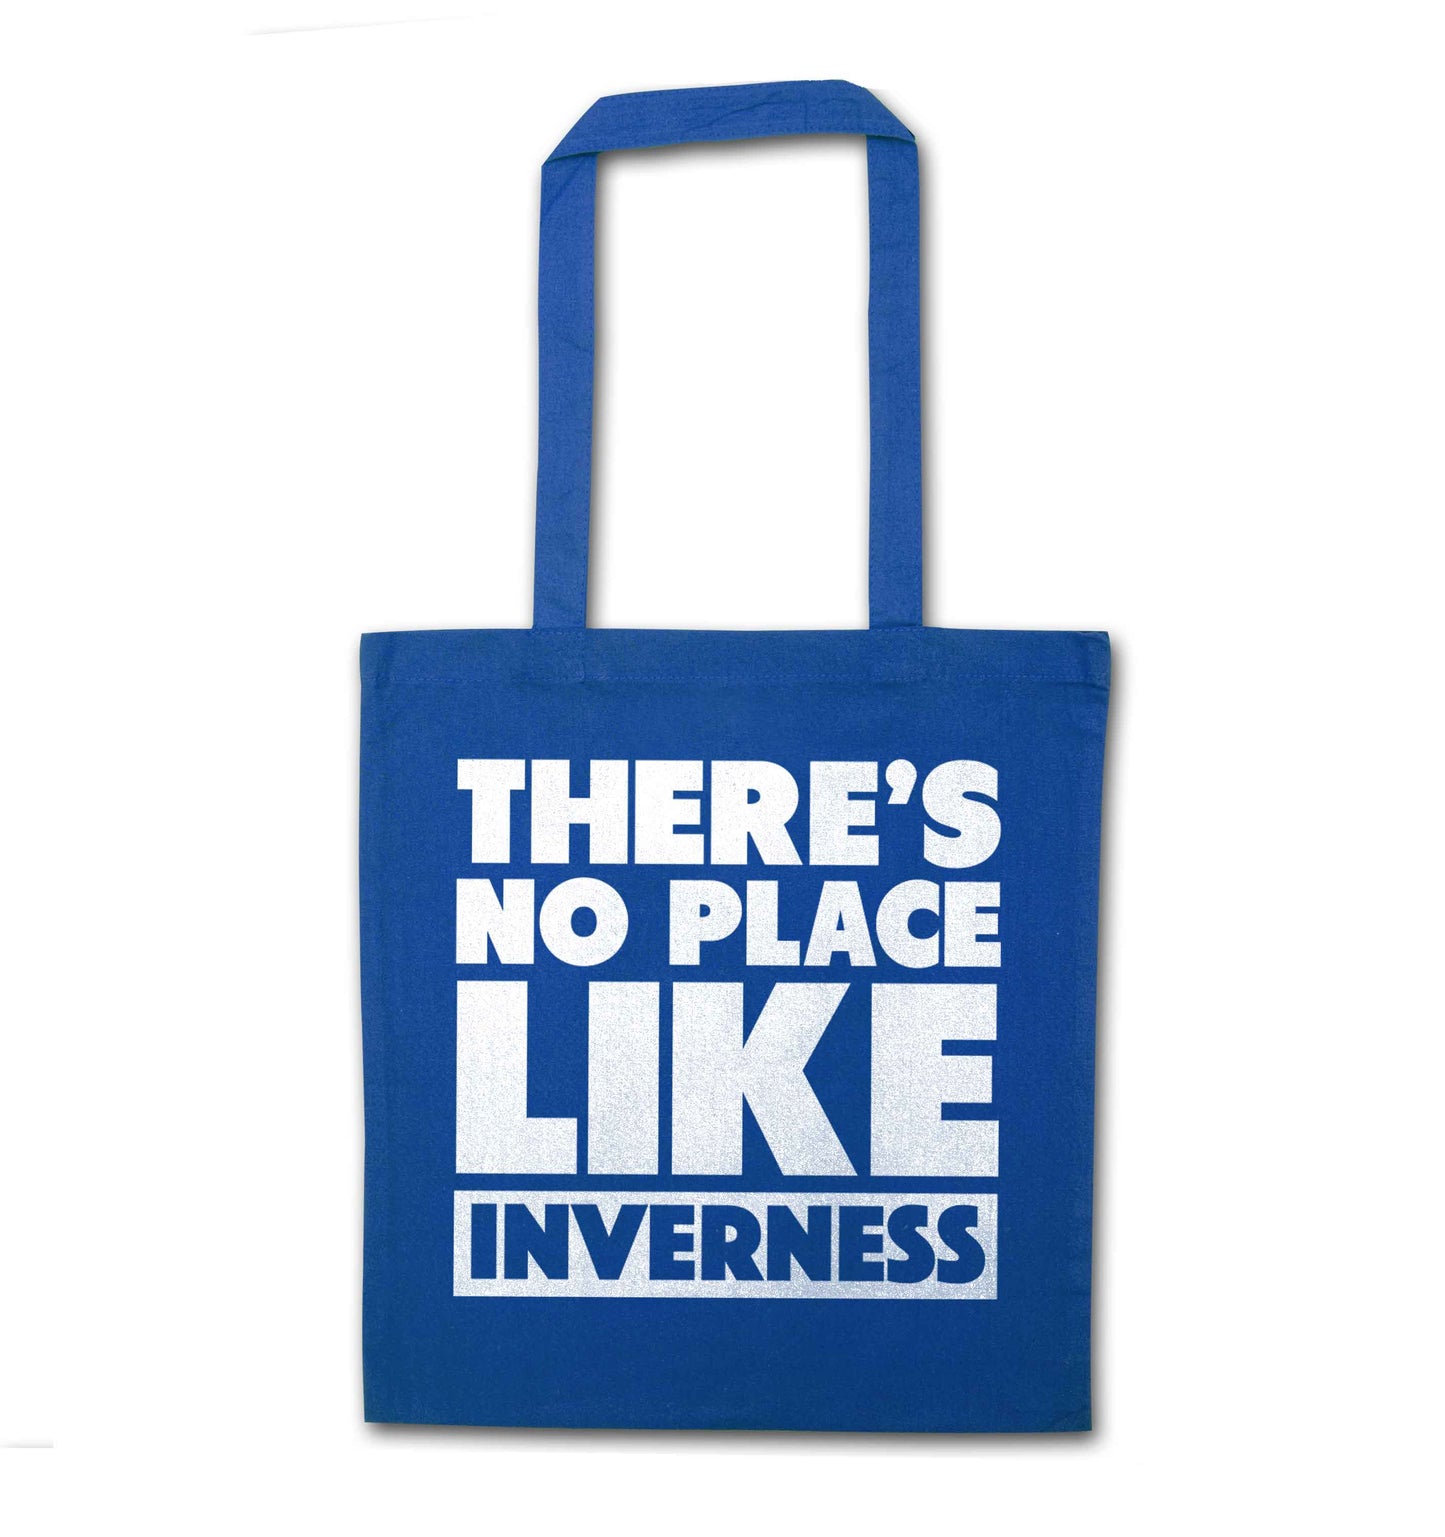 There's no place like Inverness blue tote bag